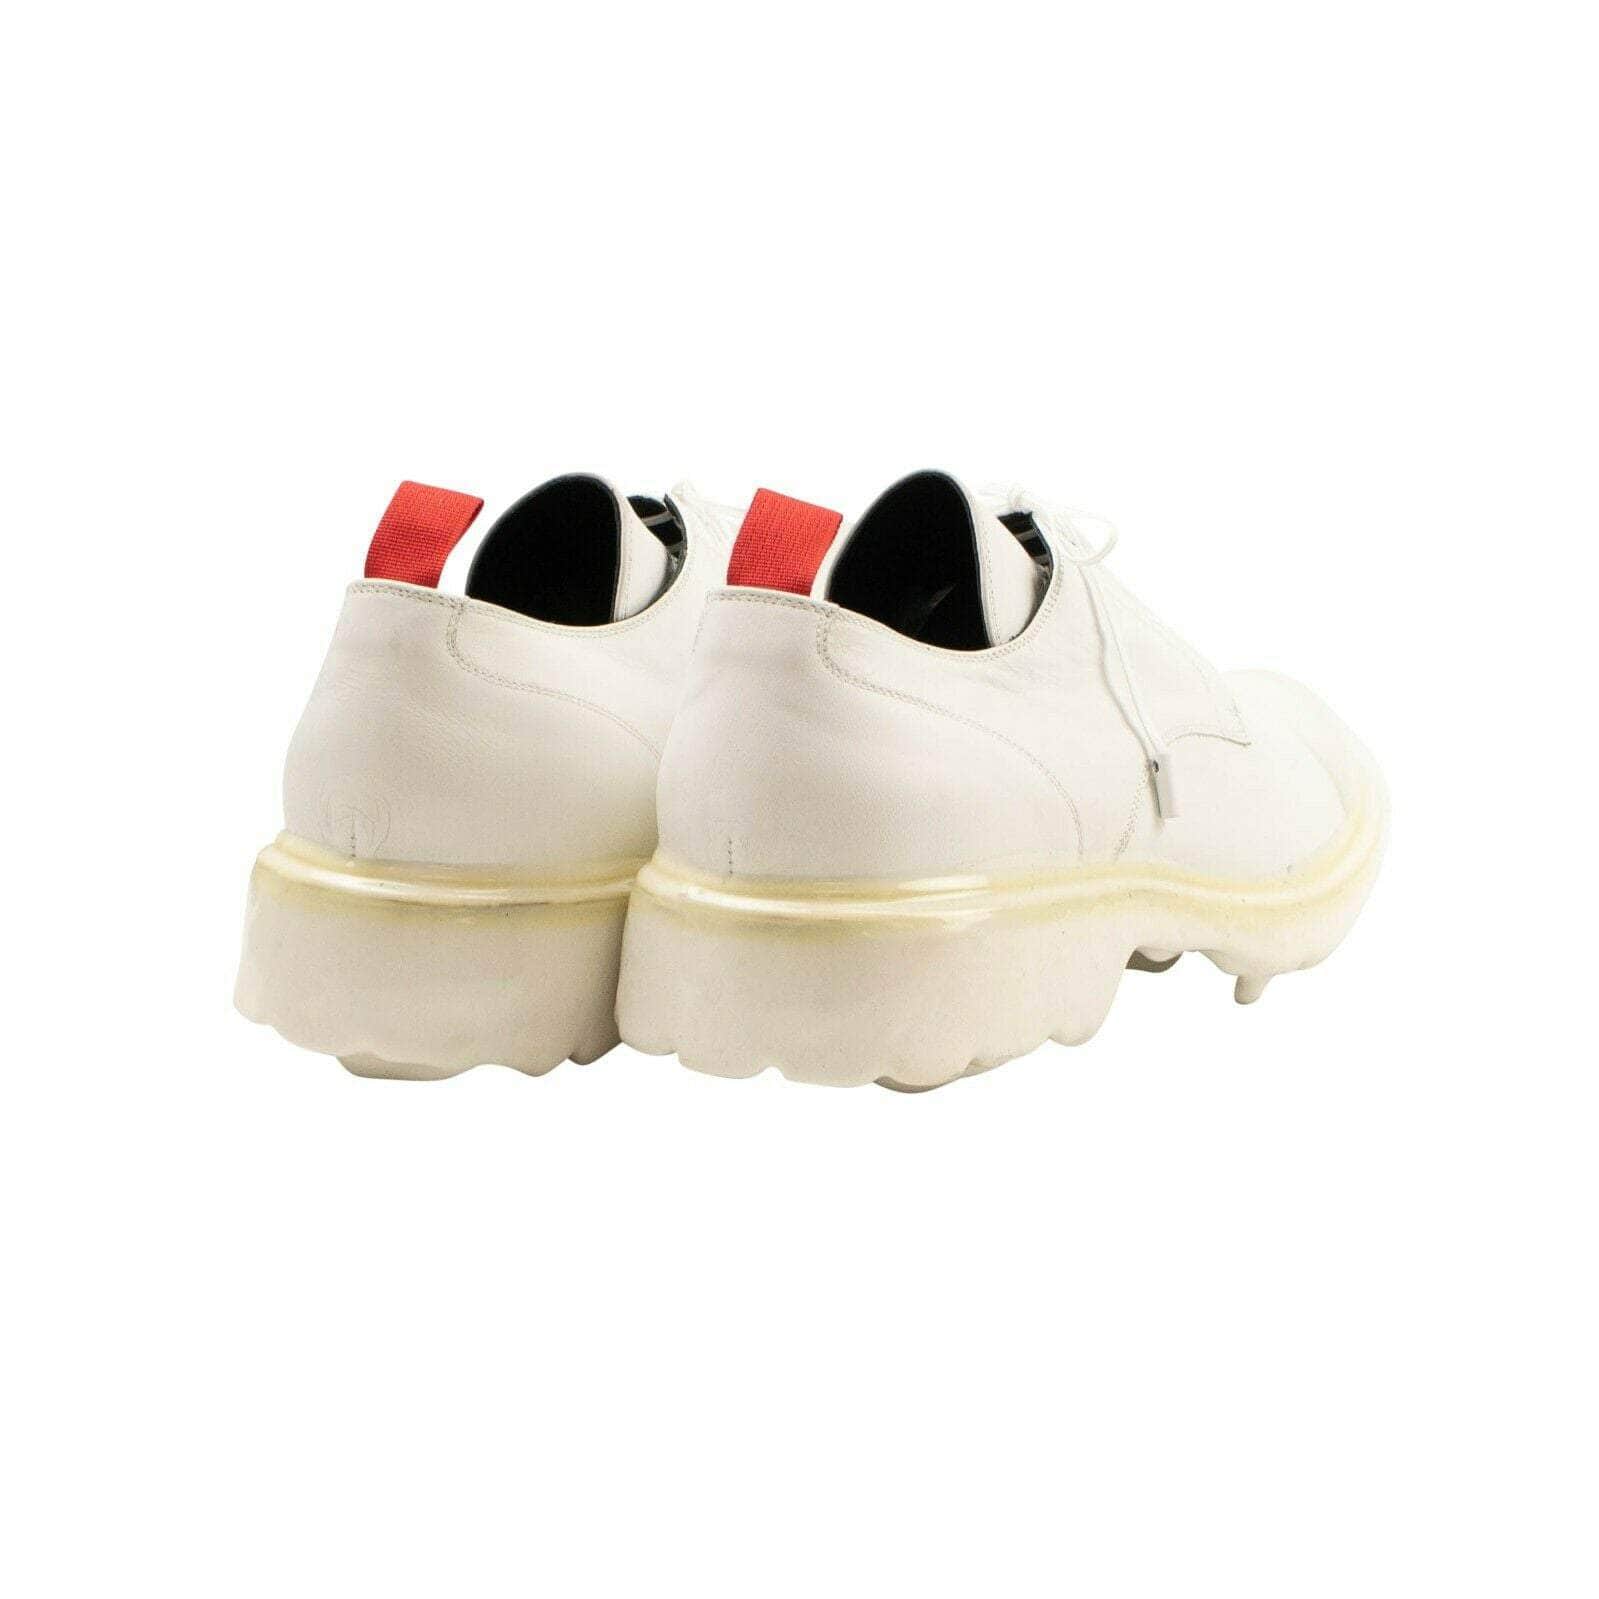 424 ON FAIRFAX 424-on-fairfax, 500-750, channelenable-all, chicmi, couponcollection, gender-mens, main-shoes, mens-shoes, size-41, size-42, size-43, size-44, size-45 White Dipped Low Top Sneakers